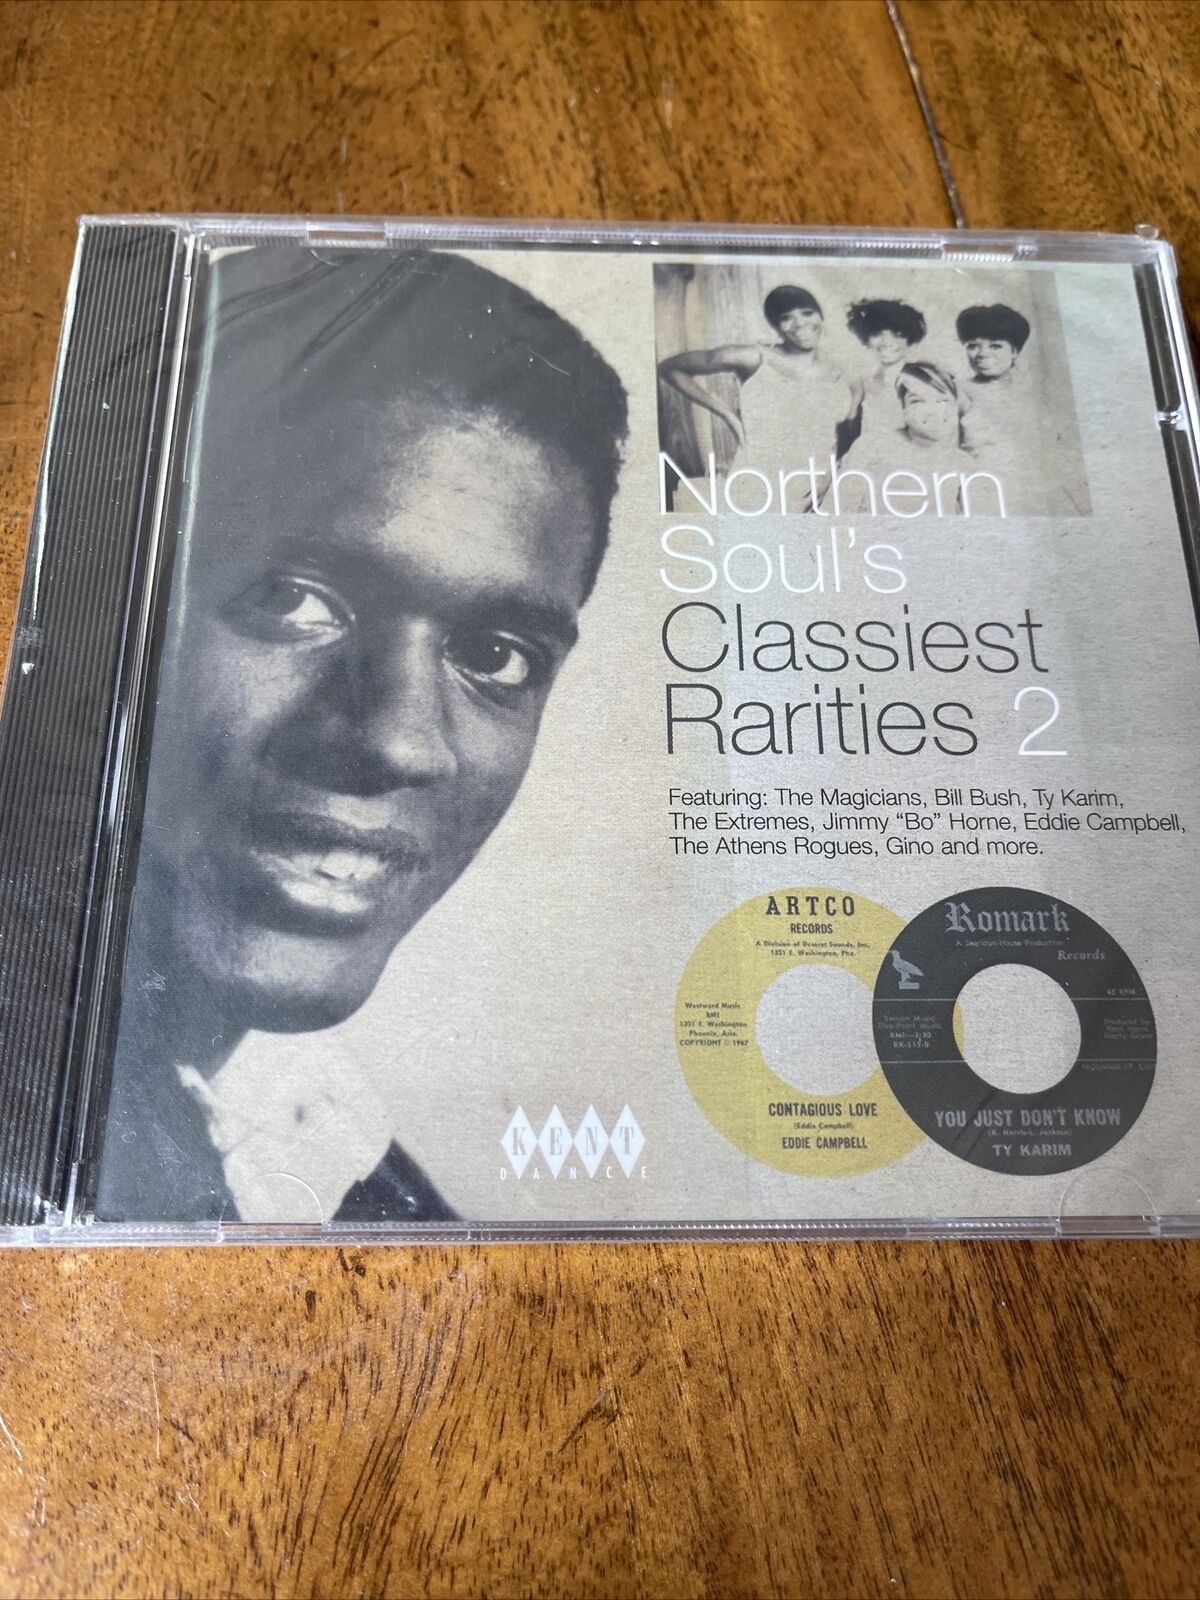 Northern Soul's Classiest Rarities, Vol. 2 by Various (CD, 2005)